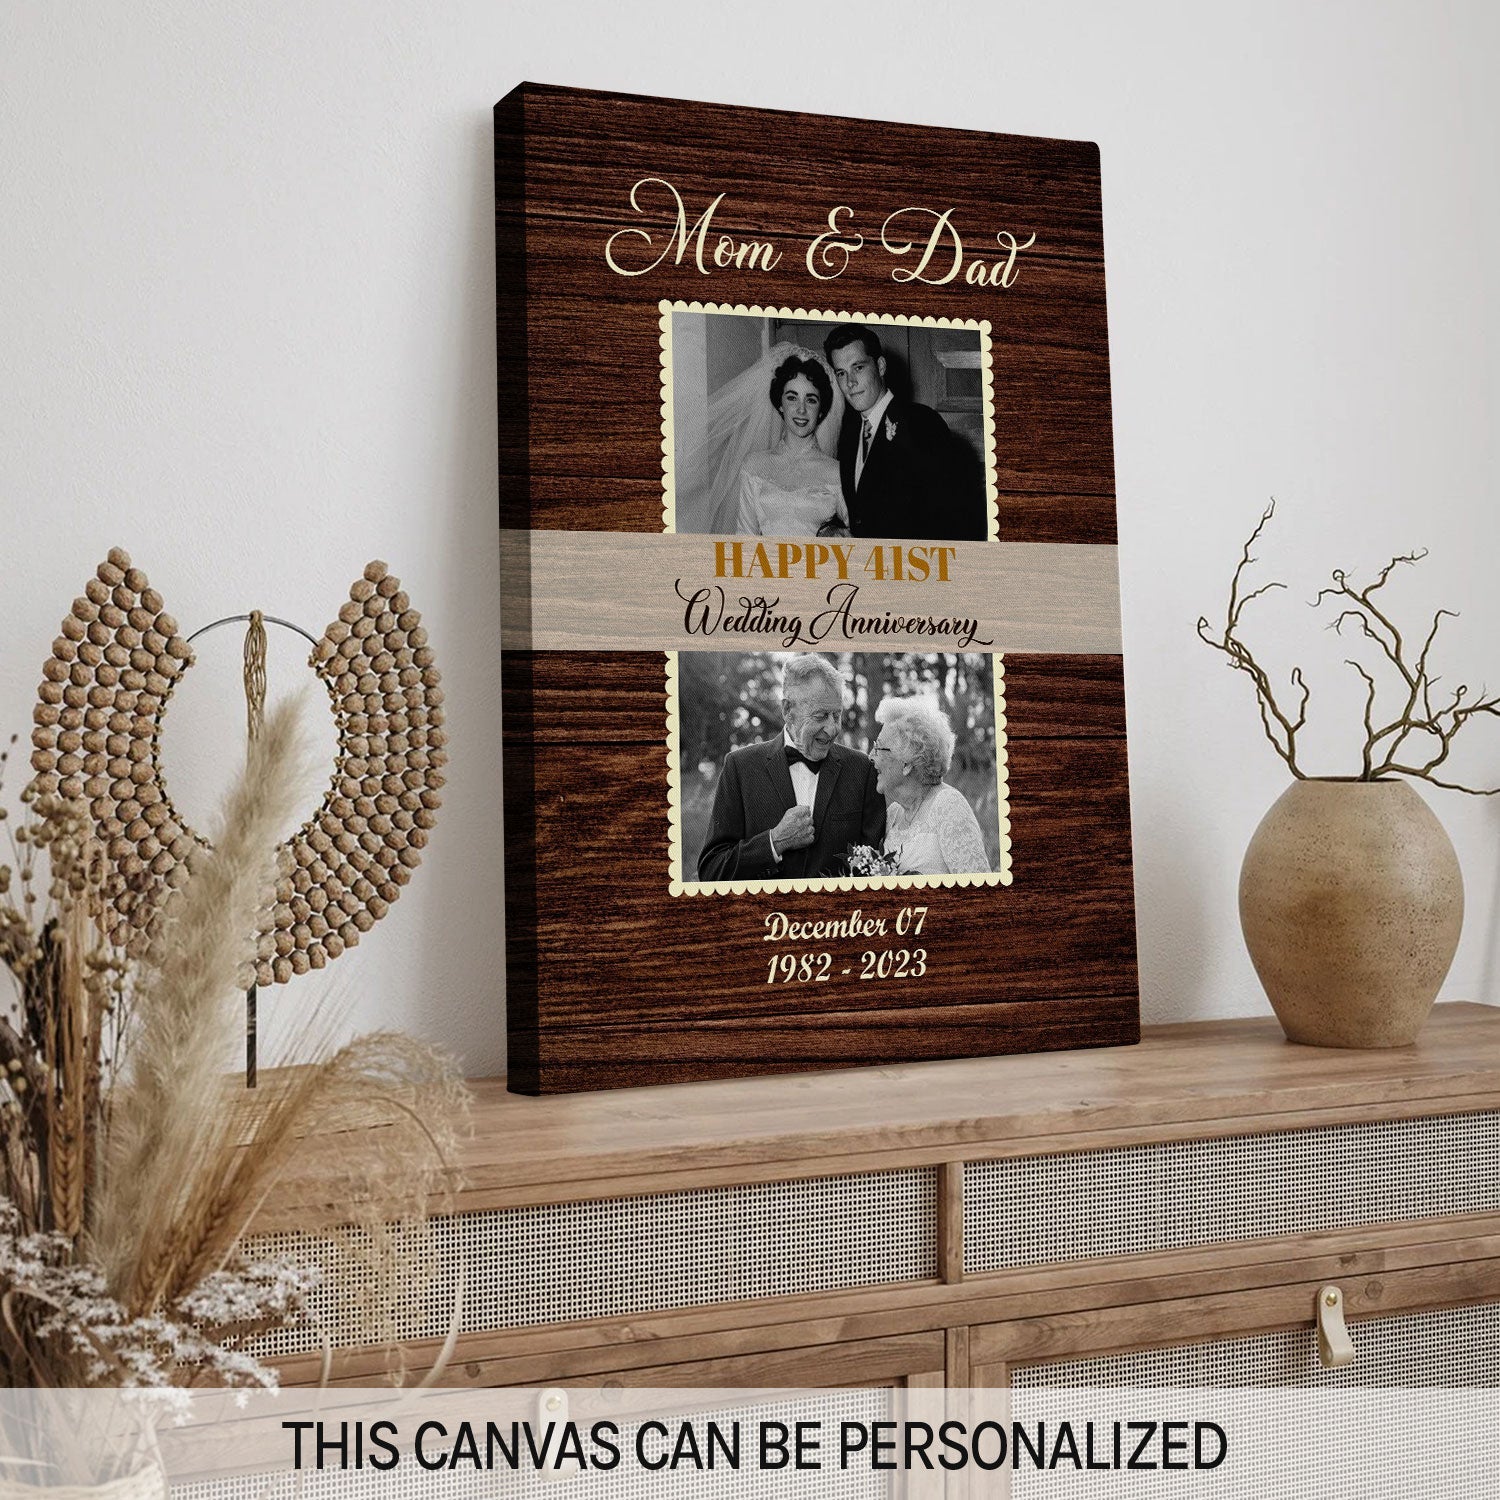 15+ Unique and beautiful wedding anniversary gift ideas for parents! |  Marriage anniversary gifts, 40th wedding anniversary gifts, Unique wedding anniversary  gifts